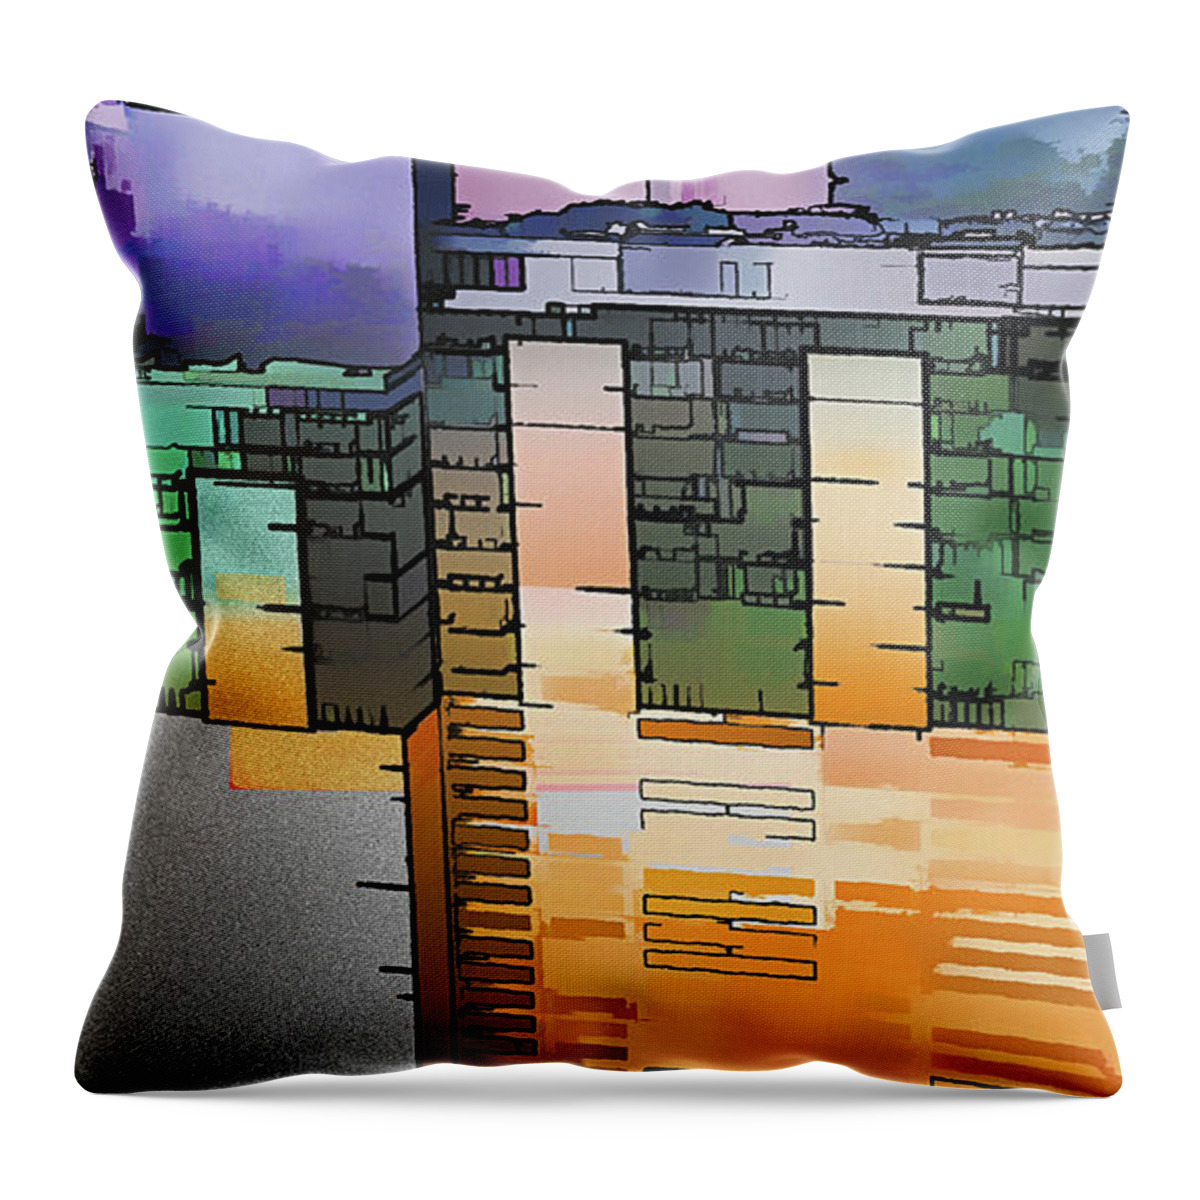 Urban Throw Pillow featuring the digital art Made For Each Other by Wendy J St Christopher